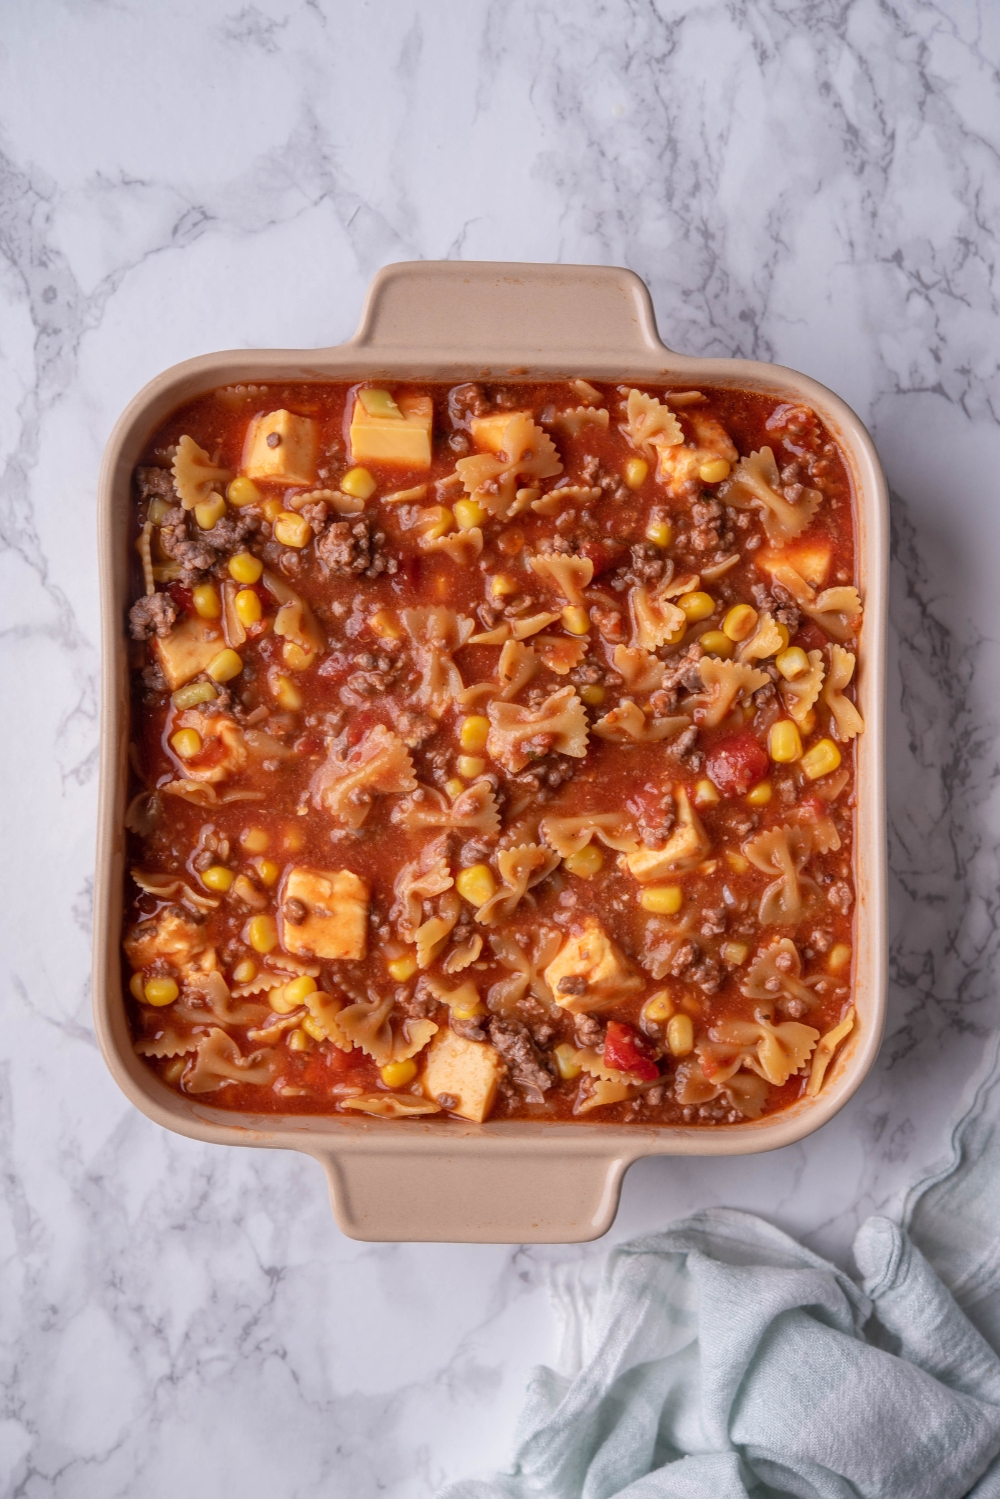 Bow tie pasta, corn, cheese cubes, and ground beef mixed in a sauce in a casserole dish.